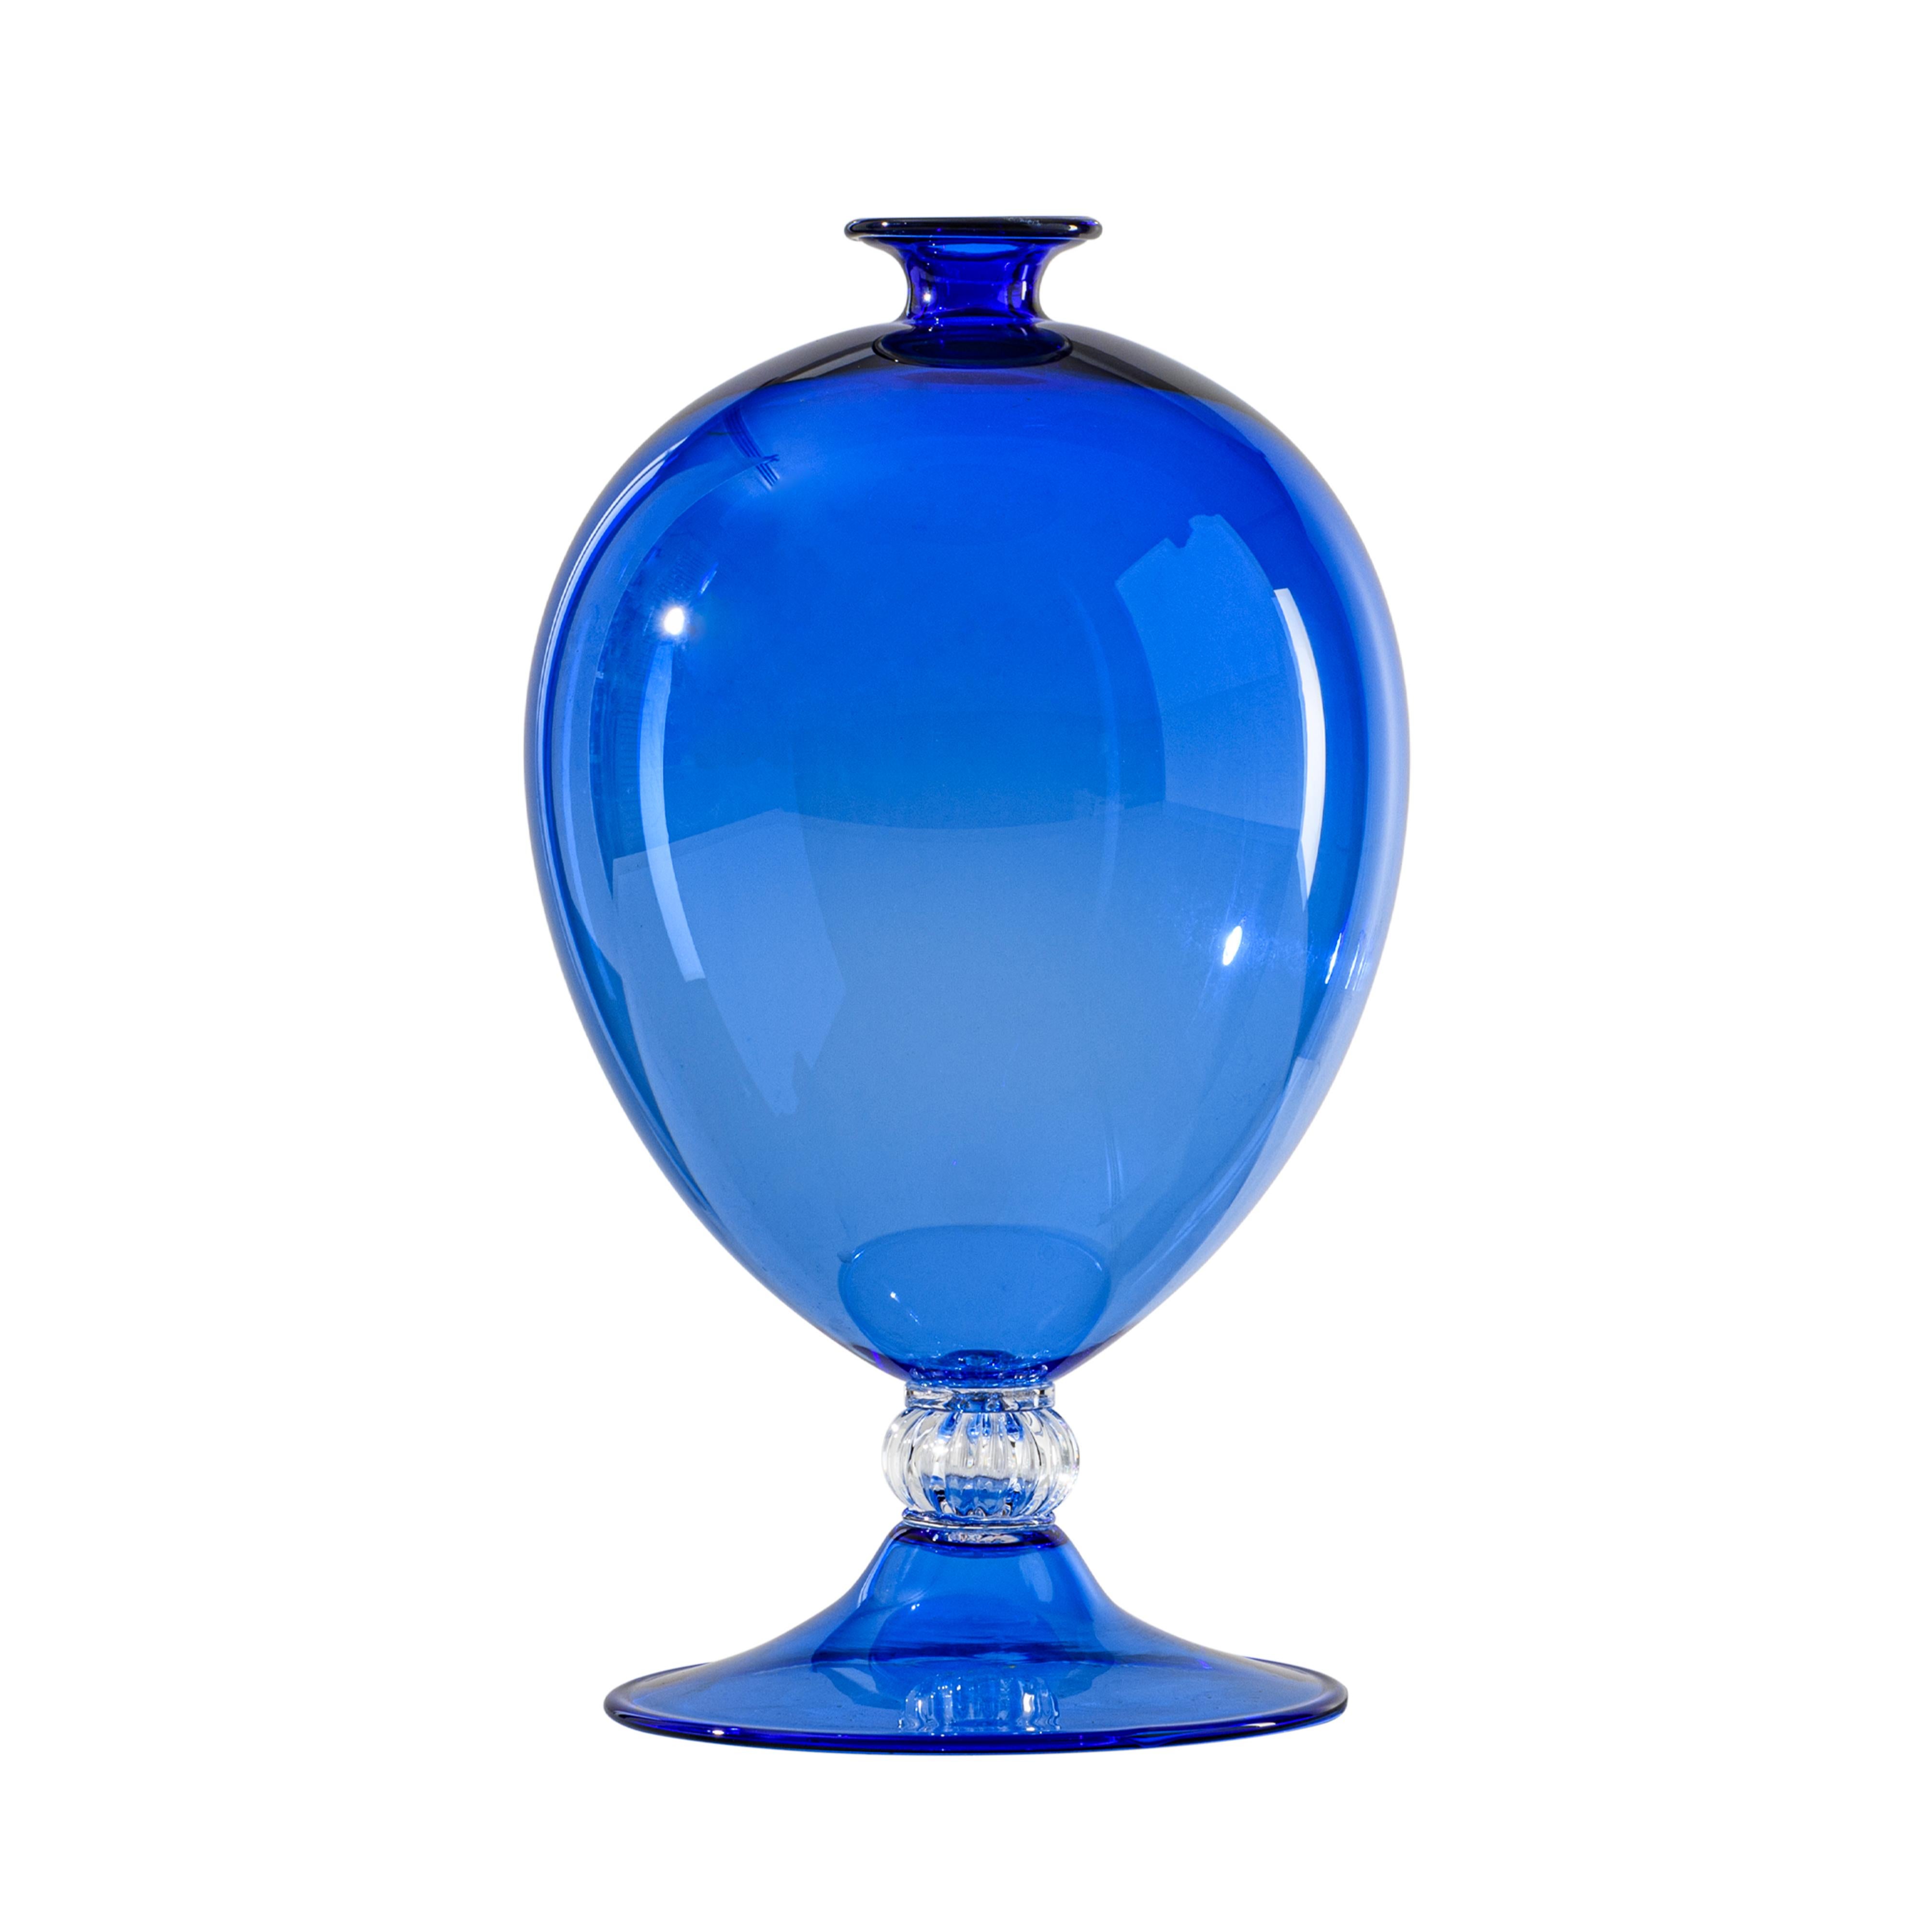 Hand-Crafted Veronese Vase by Vittorio Zecchini for Venini 1921 For Sale